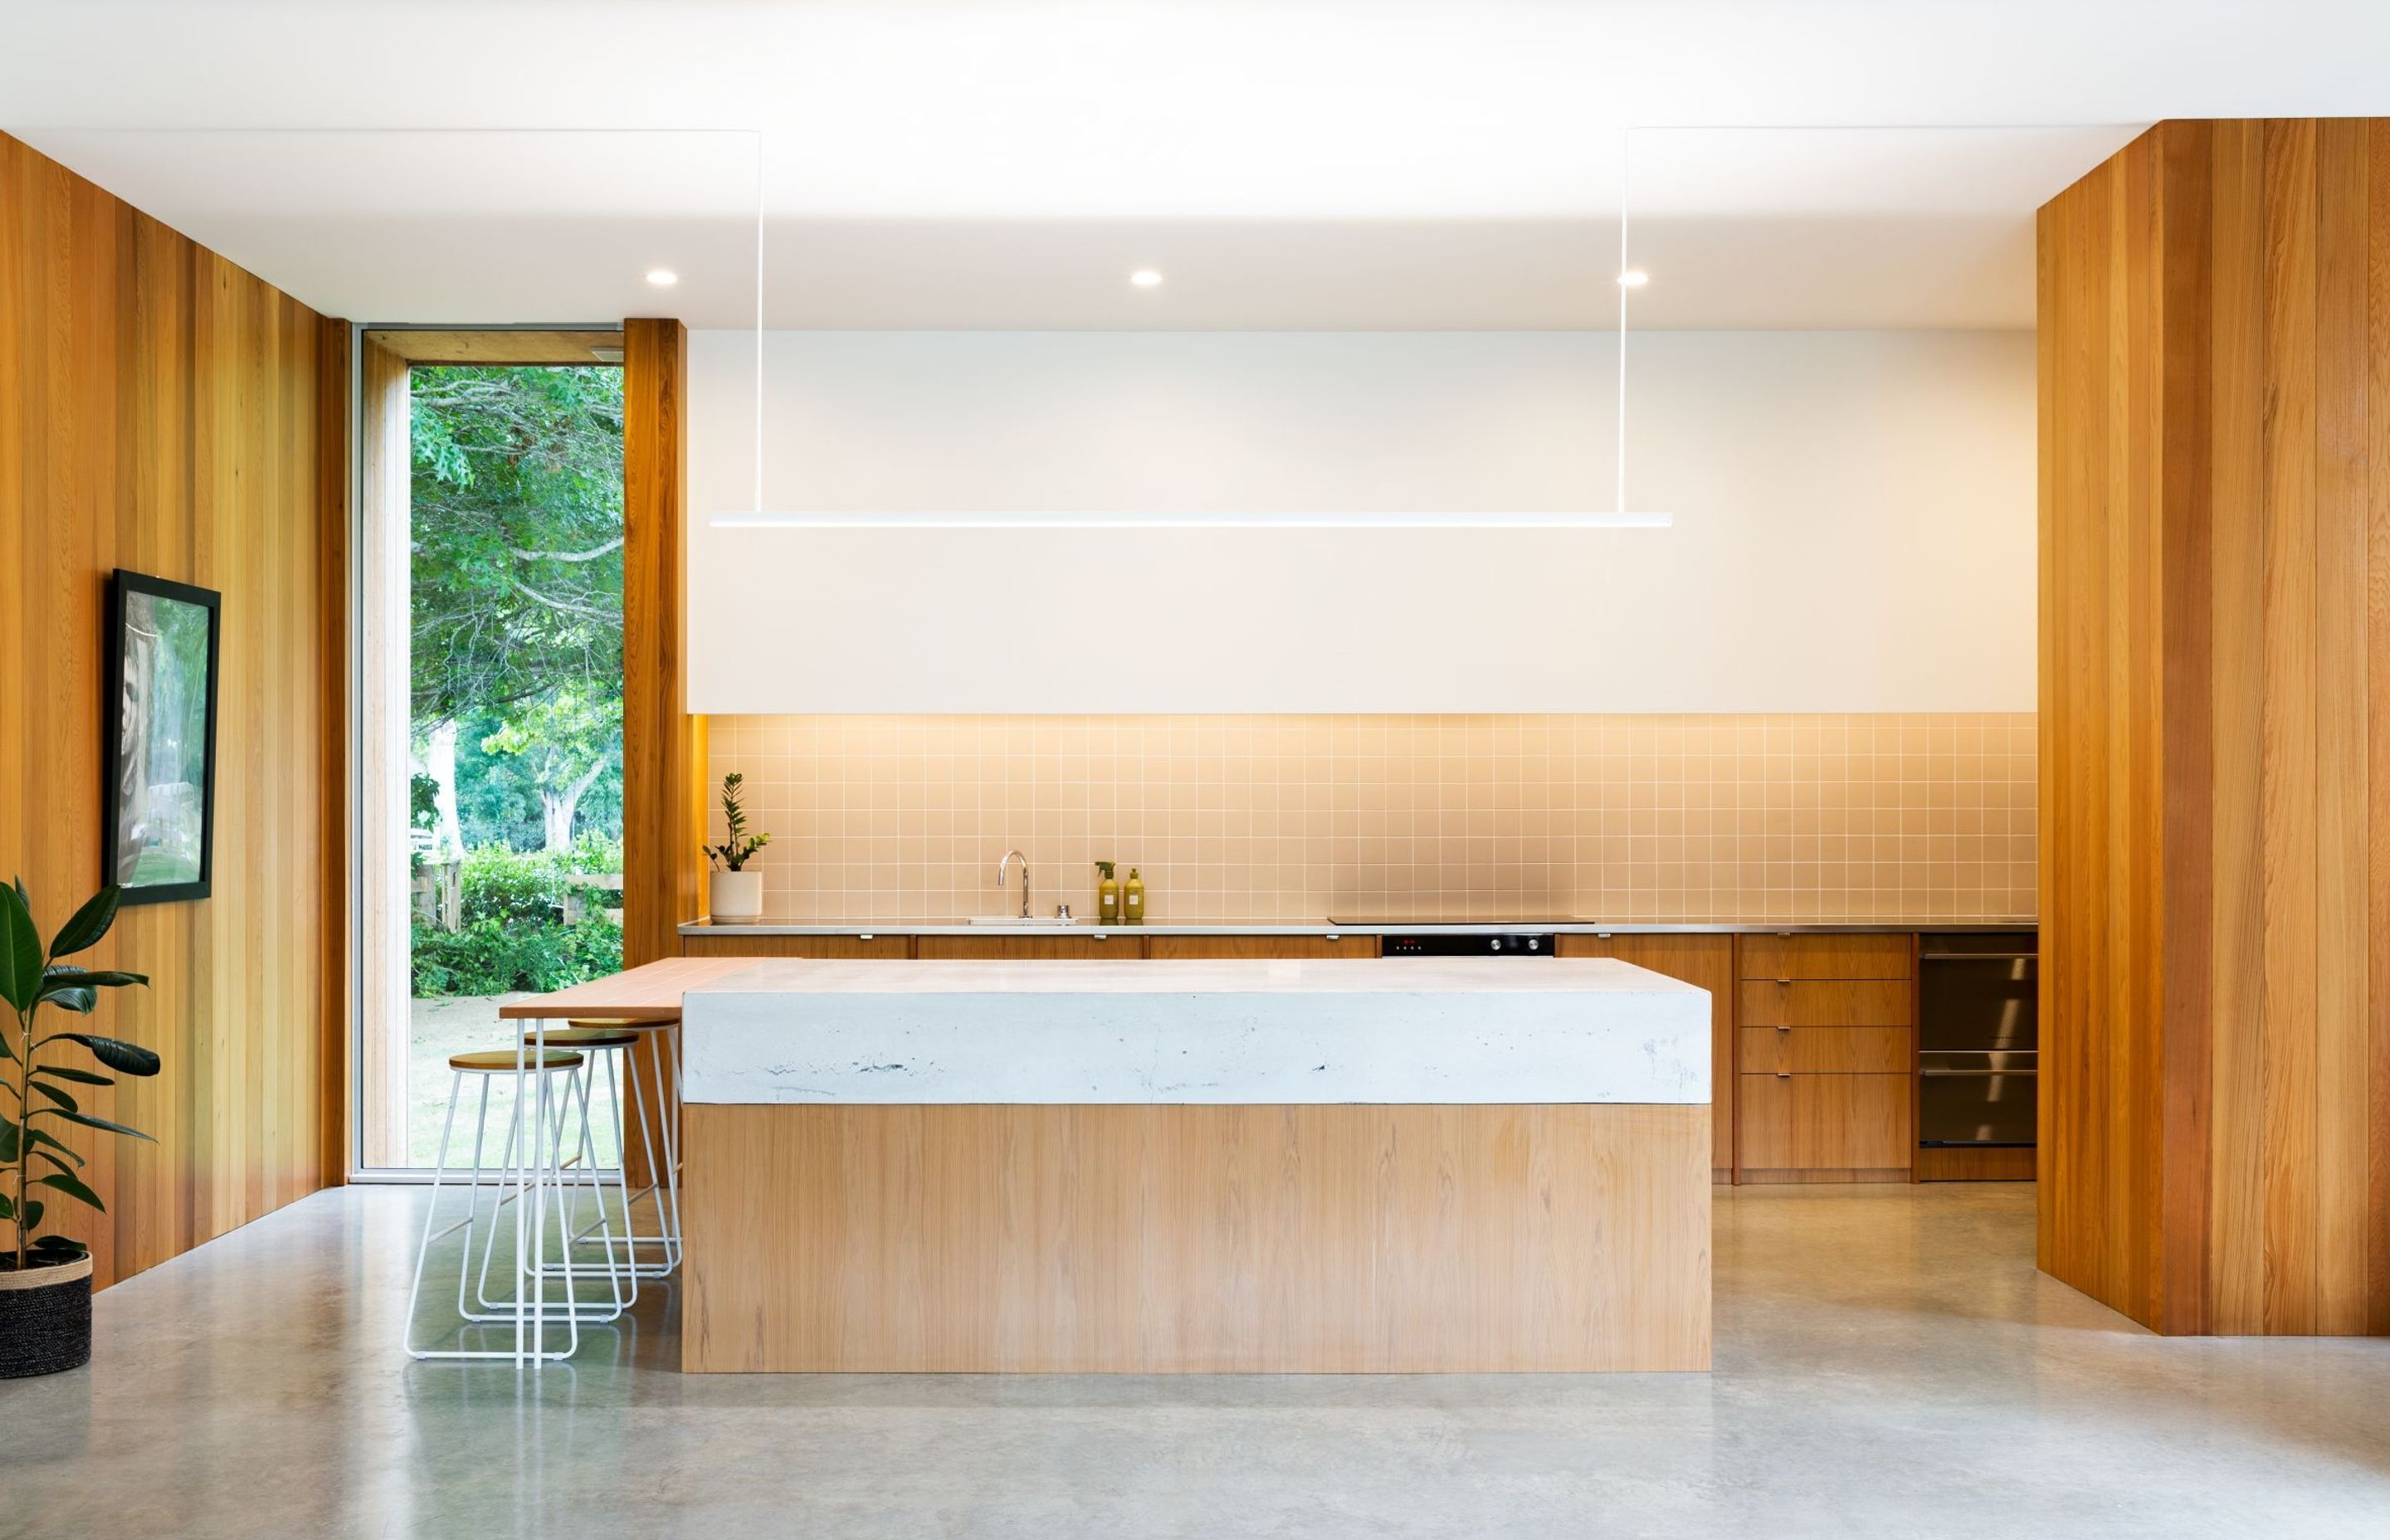 The minimalist kitchen contains accessible low-level cabinetry, with the pantry, oven and fridge hidden behind. The breakfast bar stools avoid dominating the front of the island.